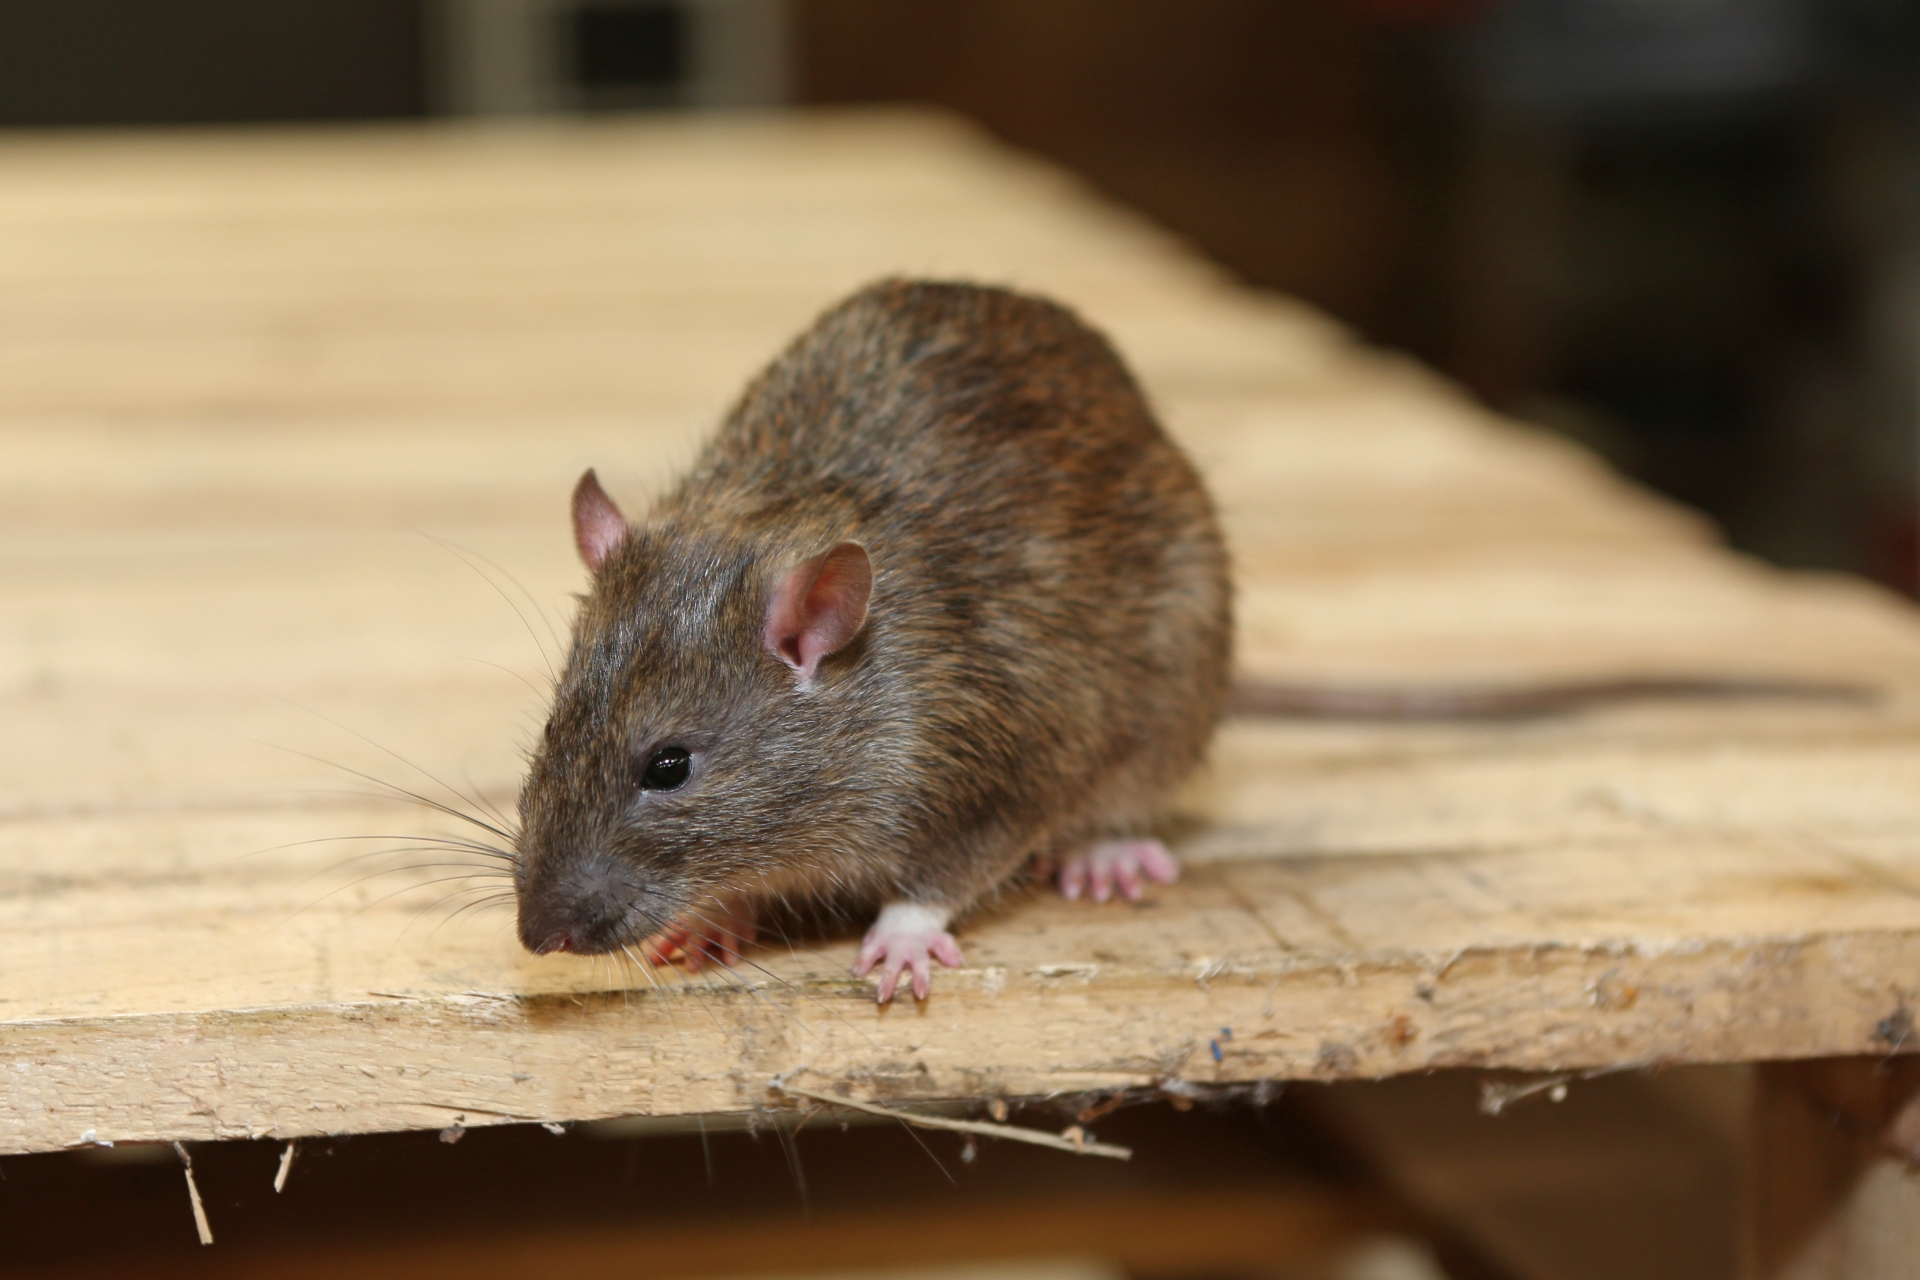 Rat extermination, Pest Control in Sutton, Rose Hill, SM1. Call Now 020 8166 9746